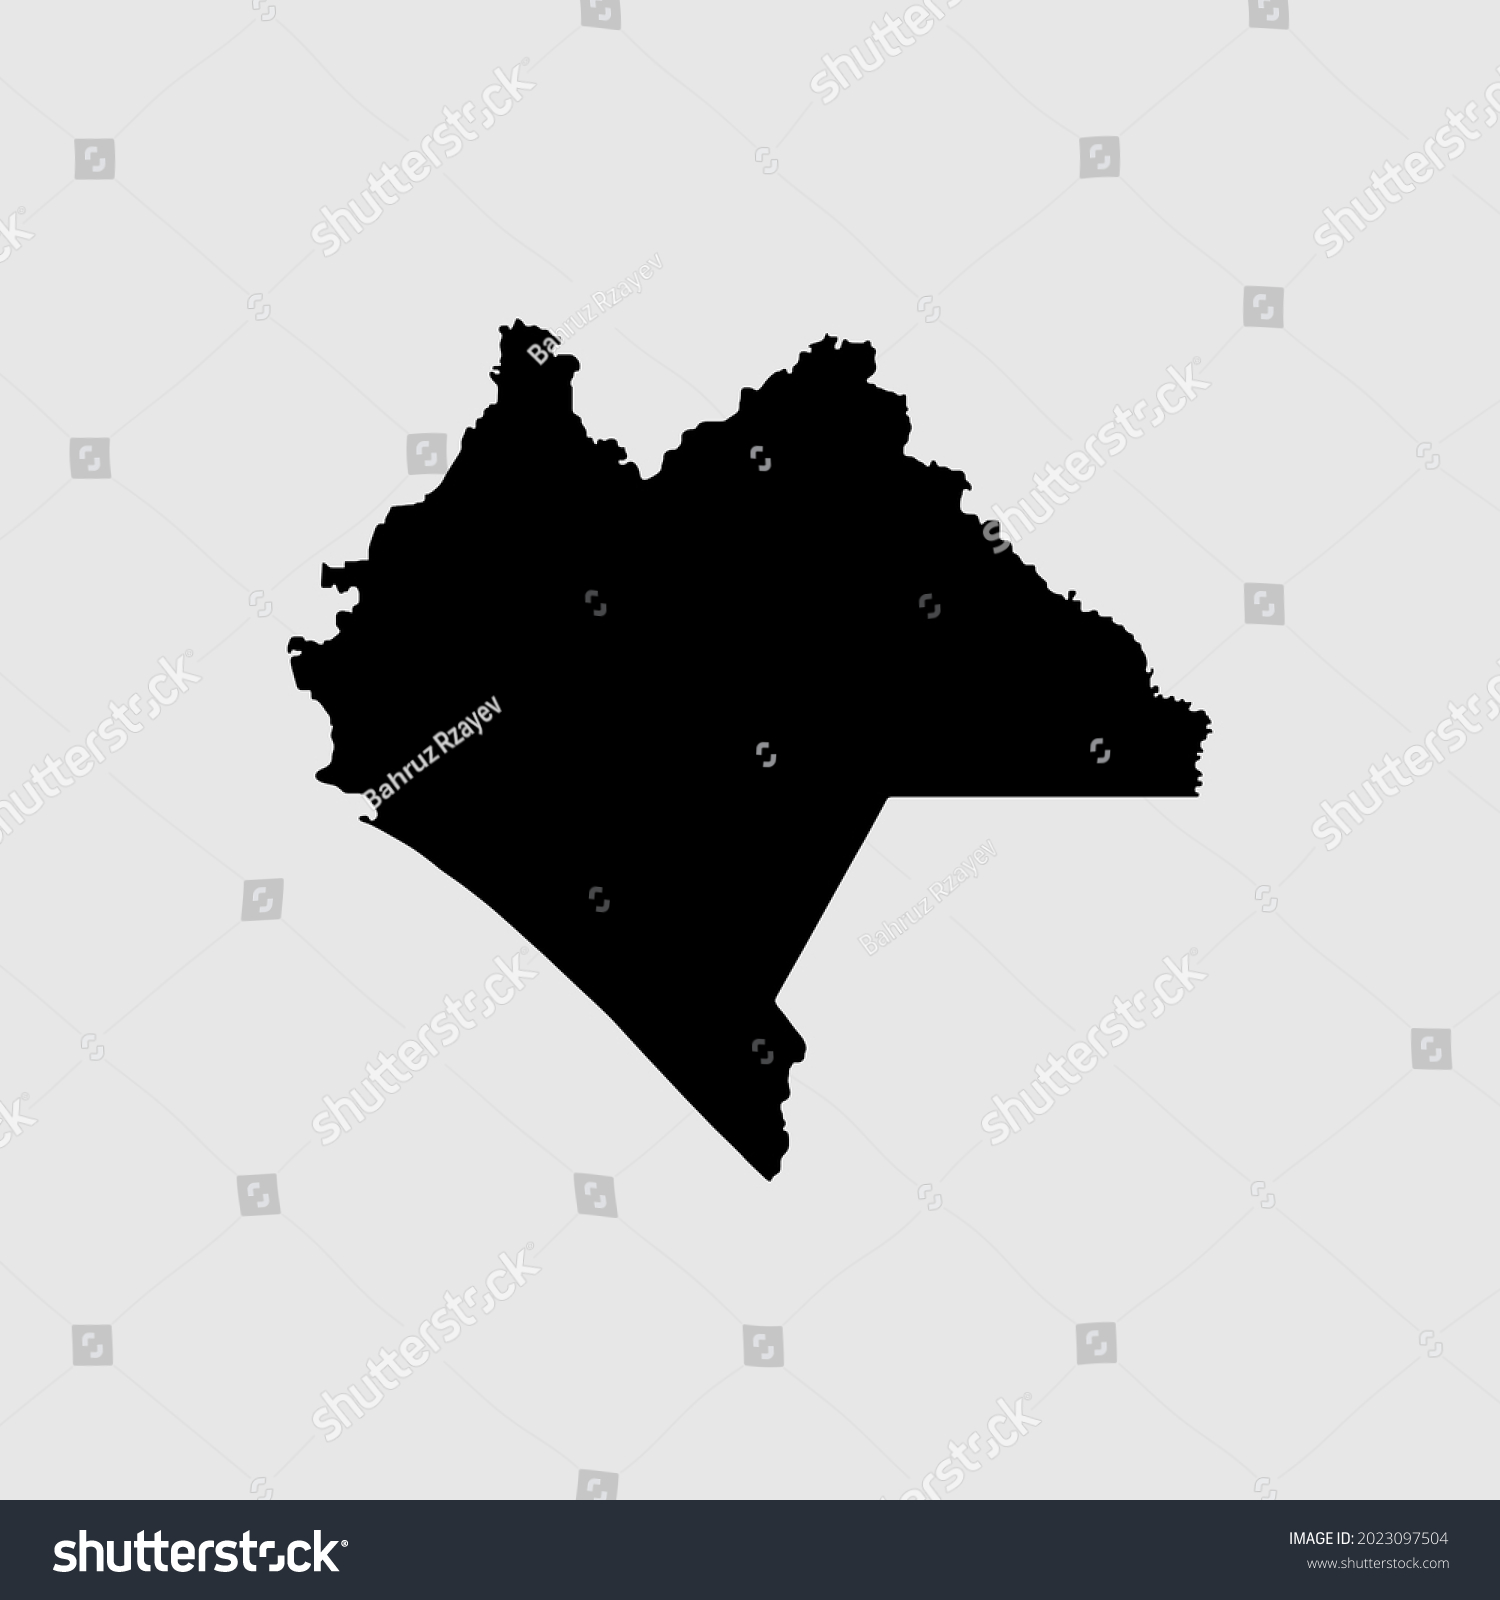 Map Of Chiapas Mexico Outline Silhouette Royalty Free Stock Vector 2023097504 3323